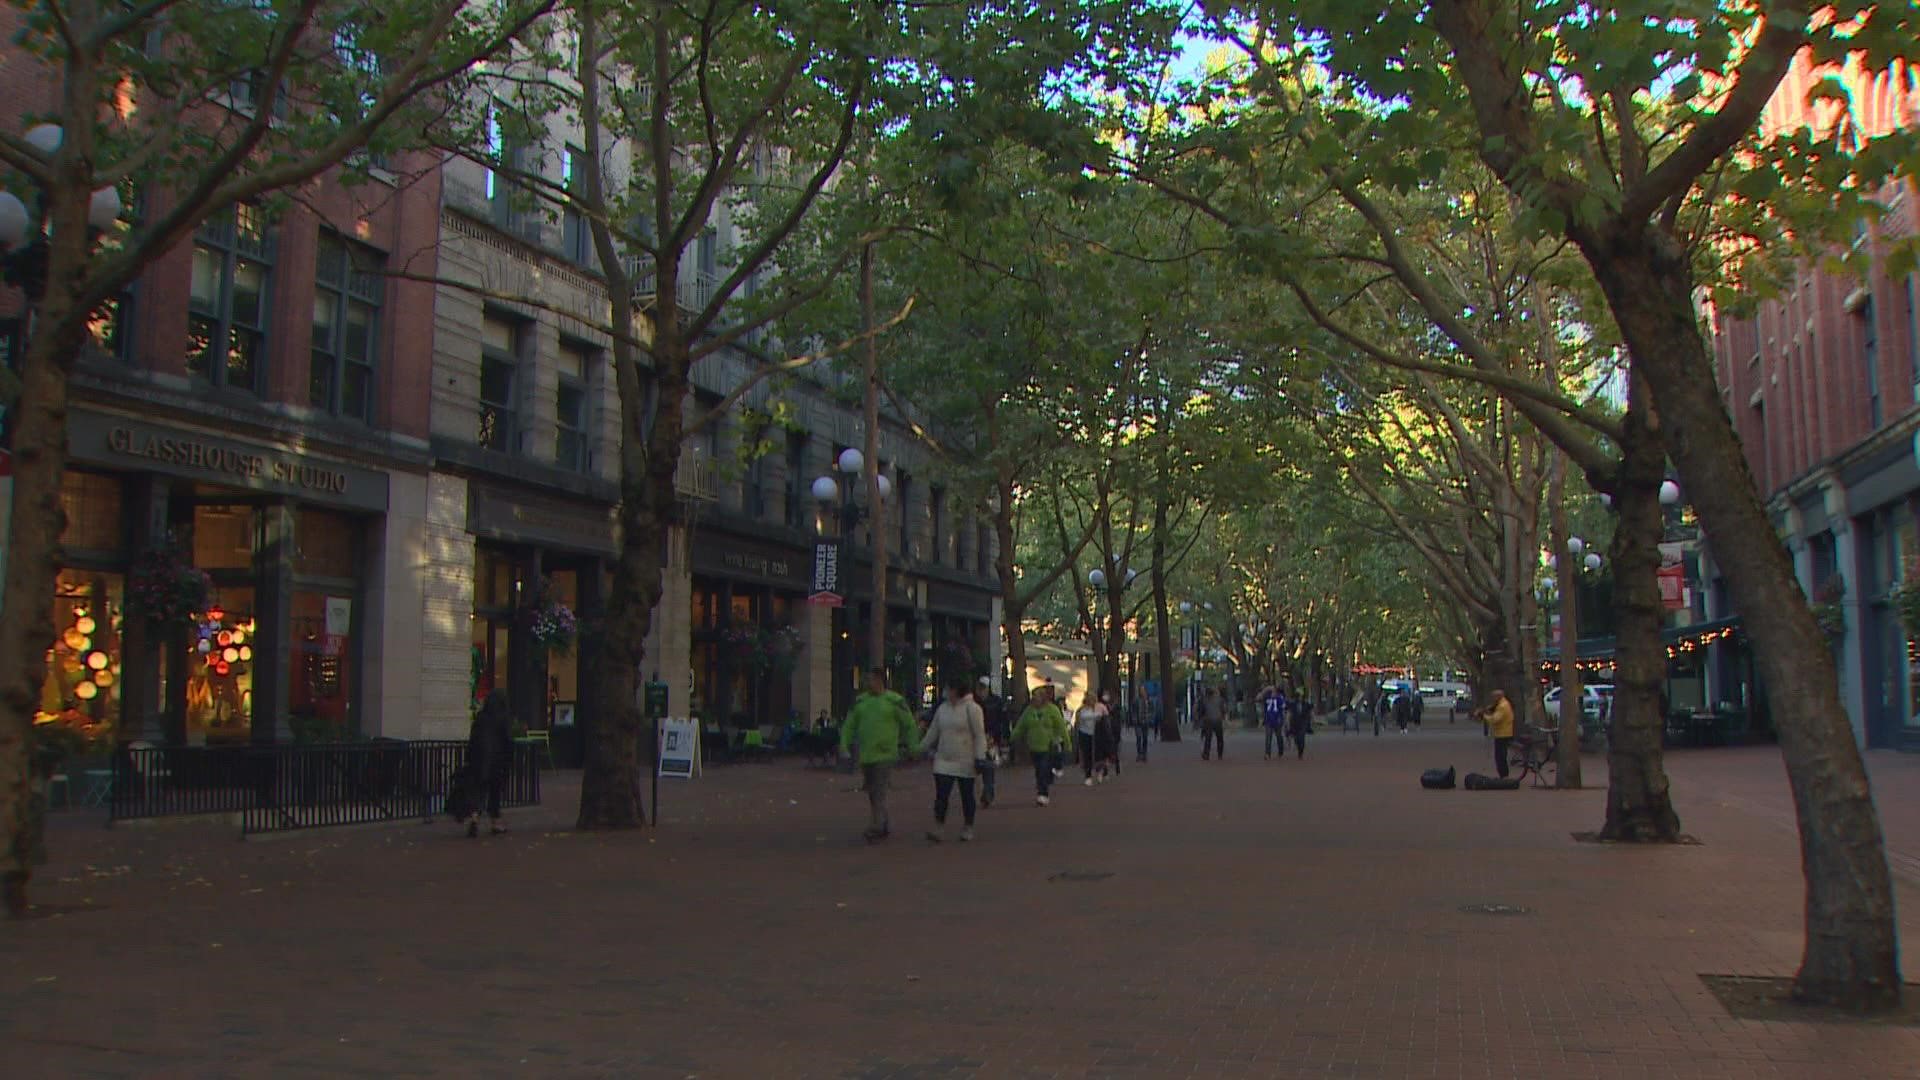 The Downtown Seattle Association wants elected officials to invest more in public safety and mental health services to help businesses in the city's core.